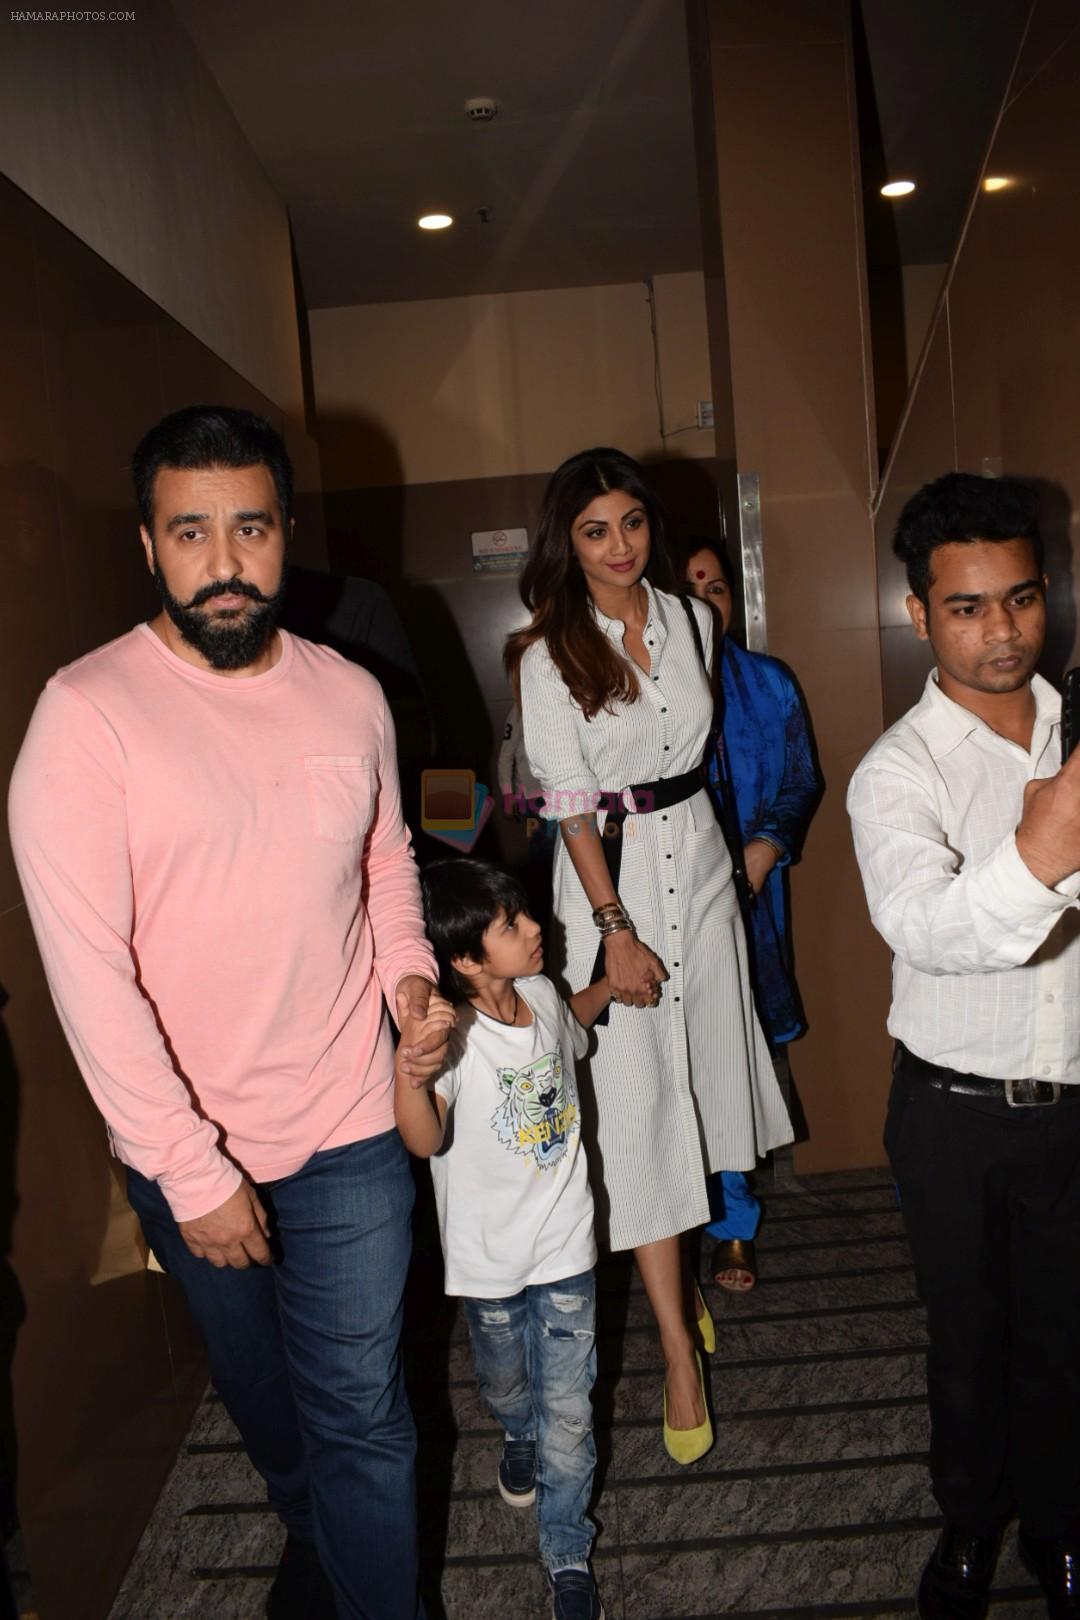 Shilpa Shetty, Raj Kundra with Son Spotted At Pvr on 31st Jan 2018